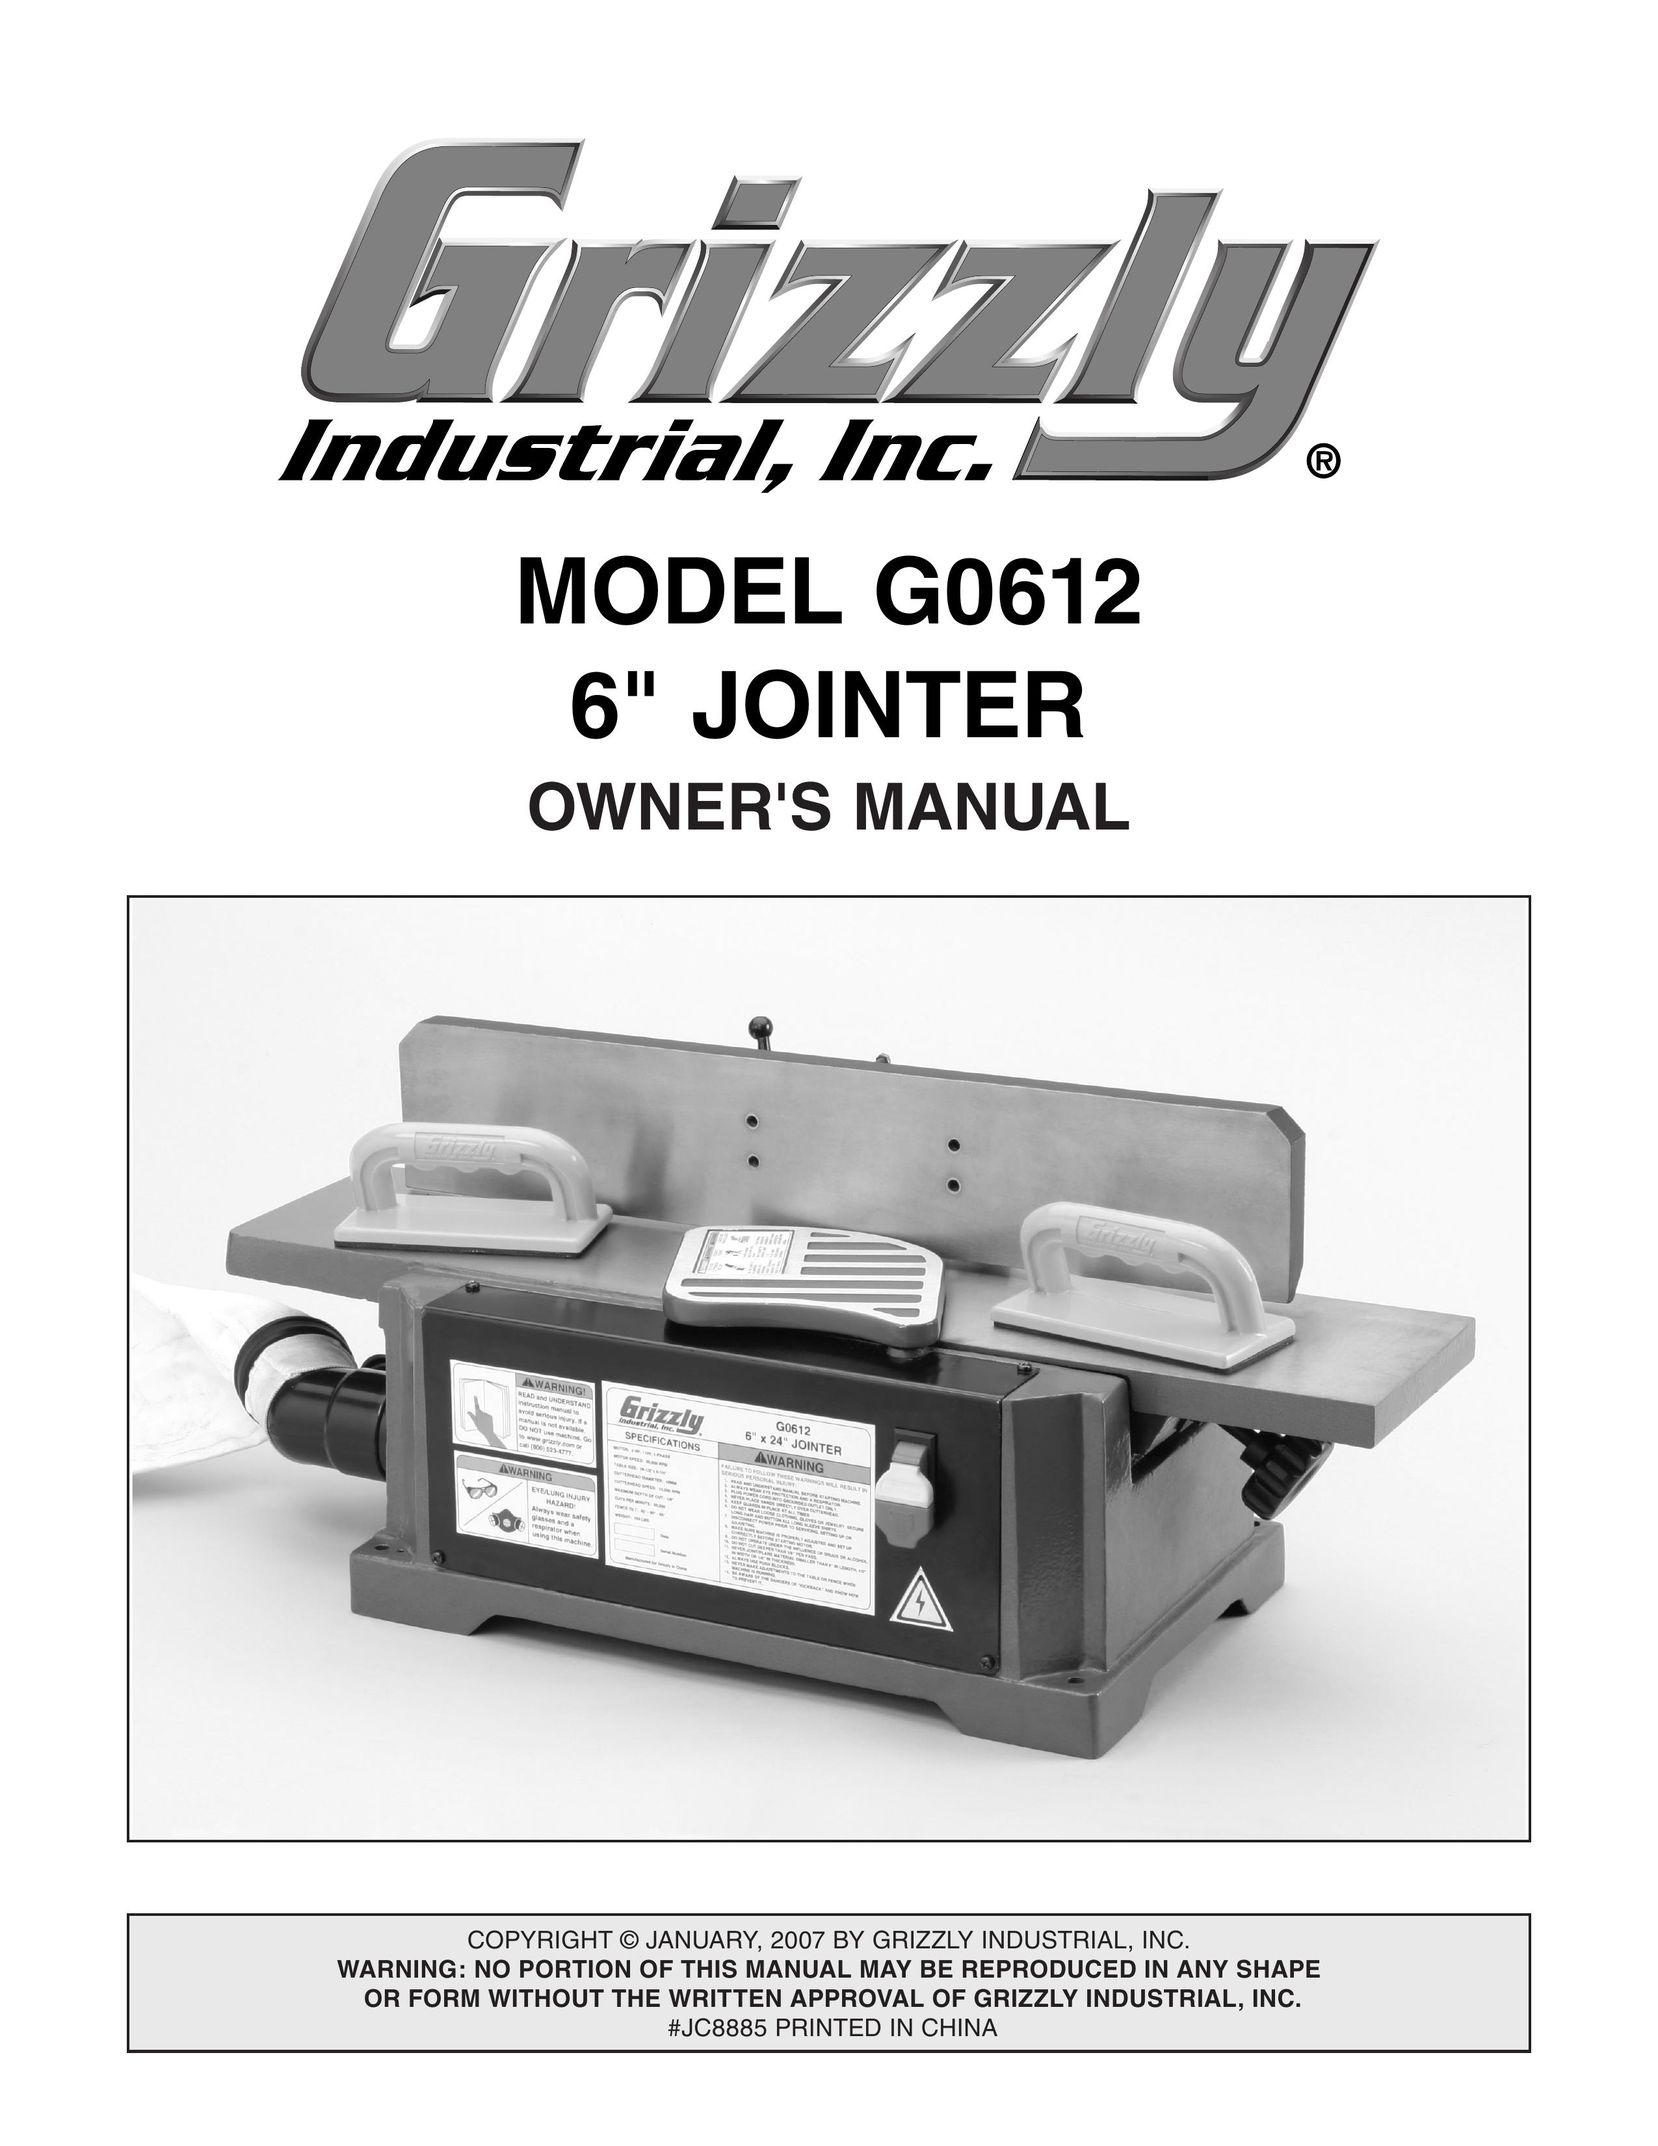 Grizzly G0612 Biscuit Joiner User Manual